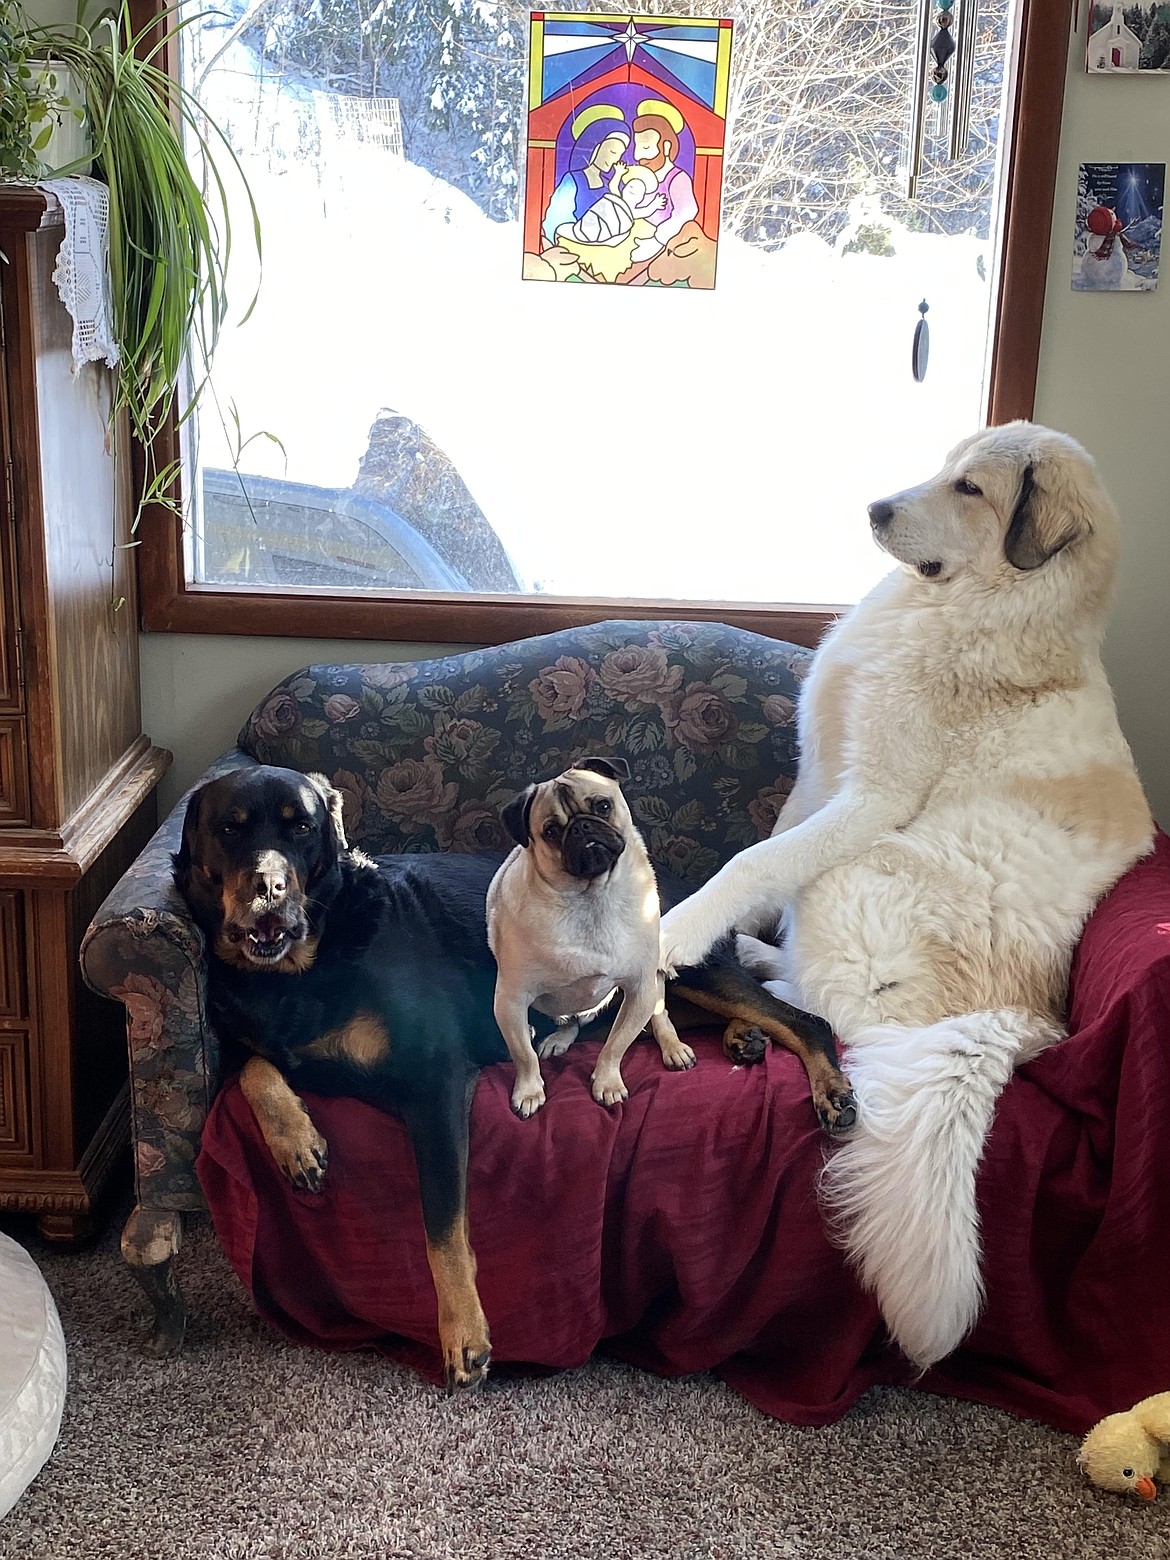 Cyrus, the Rottweiler; Don, the pug; and Great Pyrenees-Anatolian shepherd, Nacho aka Buddy; sit on the couch together. Submitted by Roger Crigger.